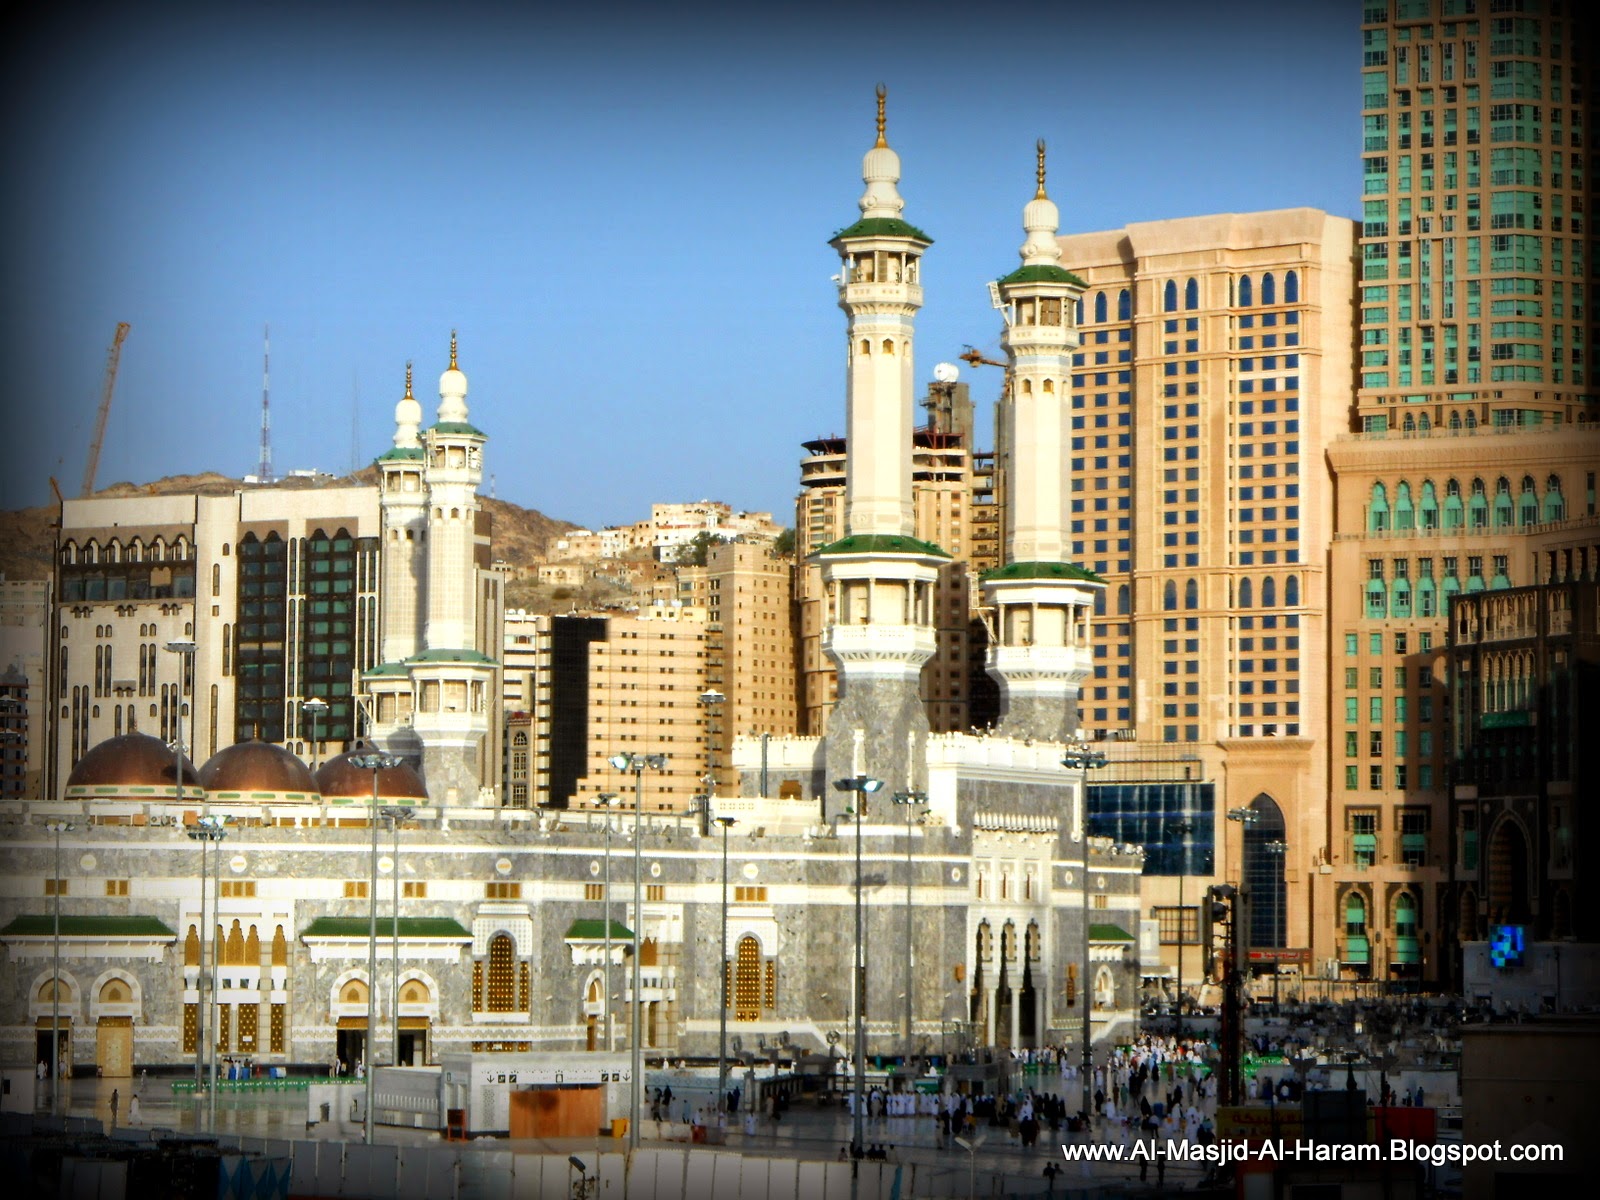 The Holy Mosque, Mecca